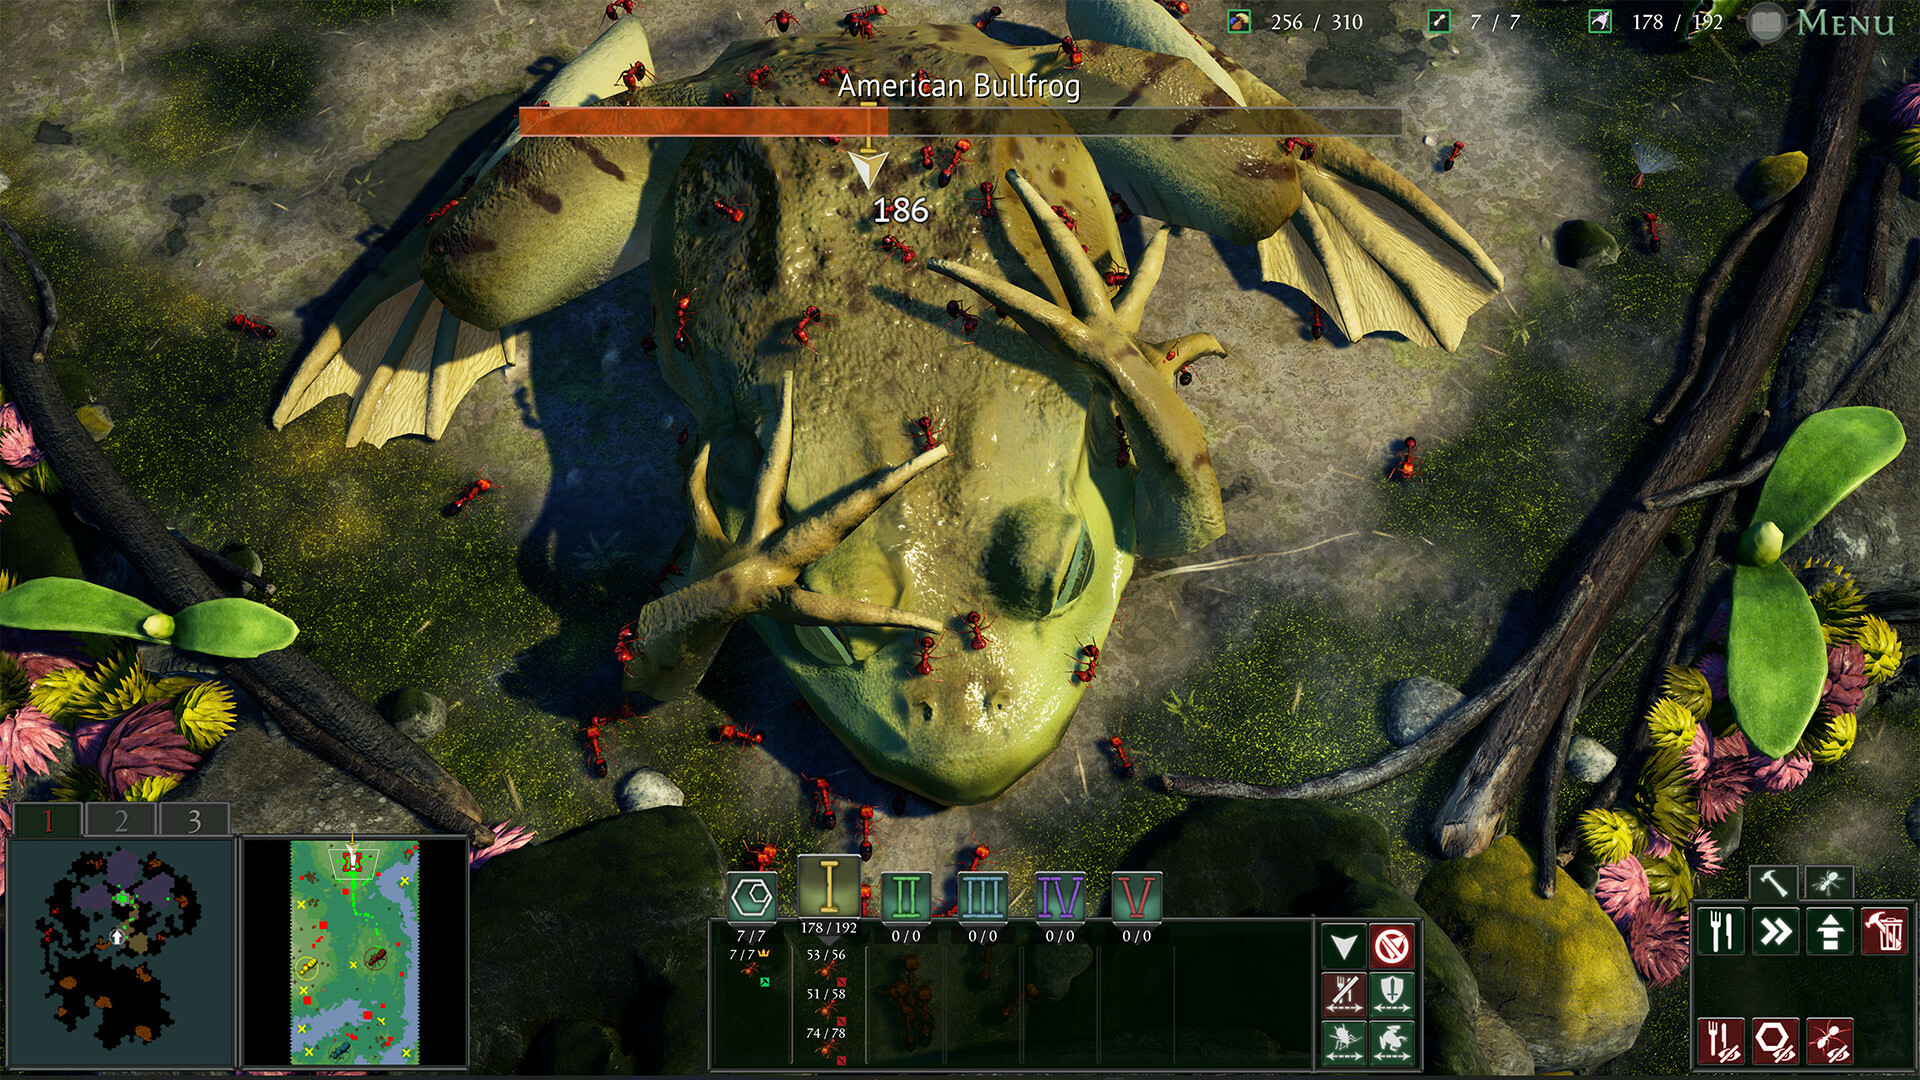 Empires of the Undergrowth Demo Featured Screenshot #1